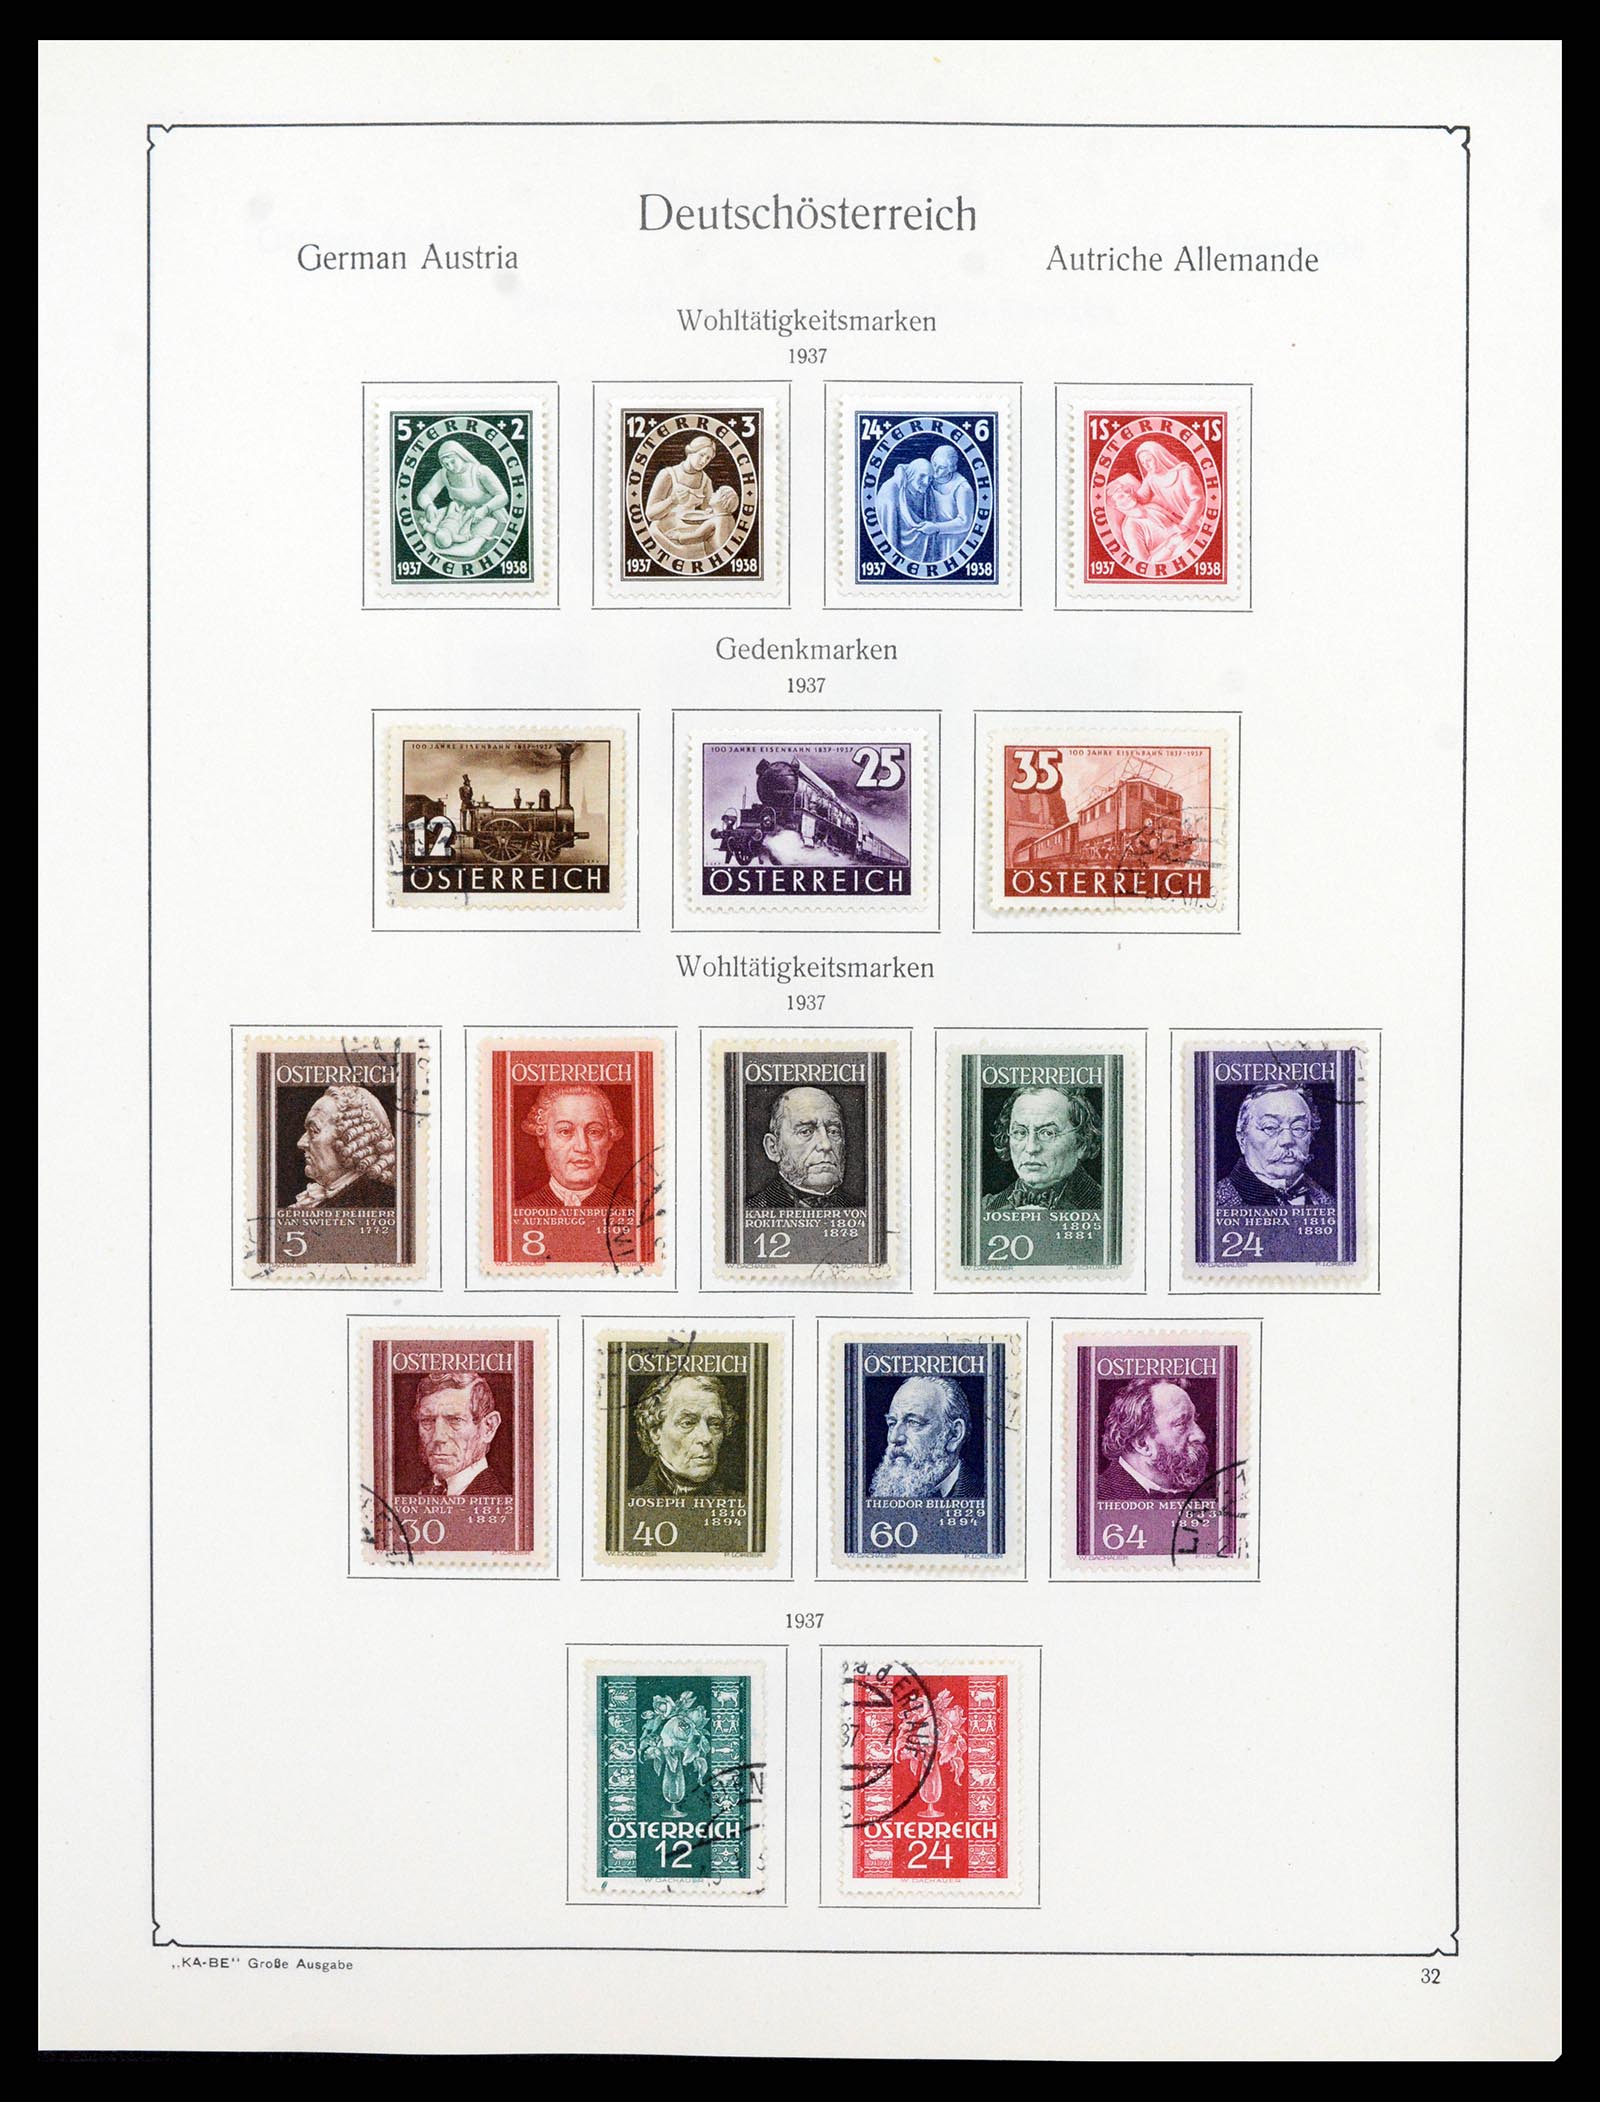 37960 093 - Stamp collection 37960 Austria and territories 1850-1984.